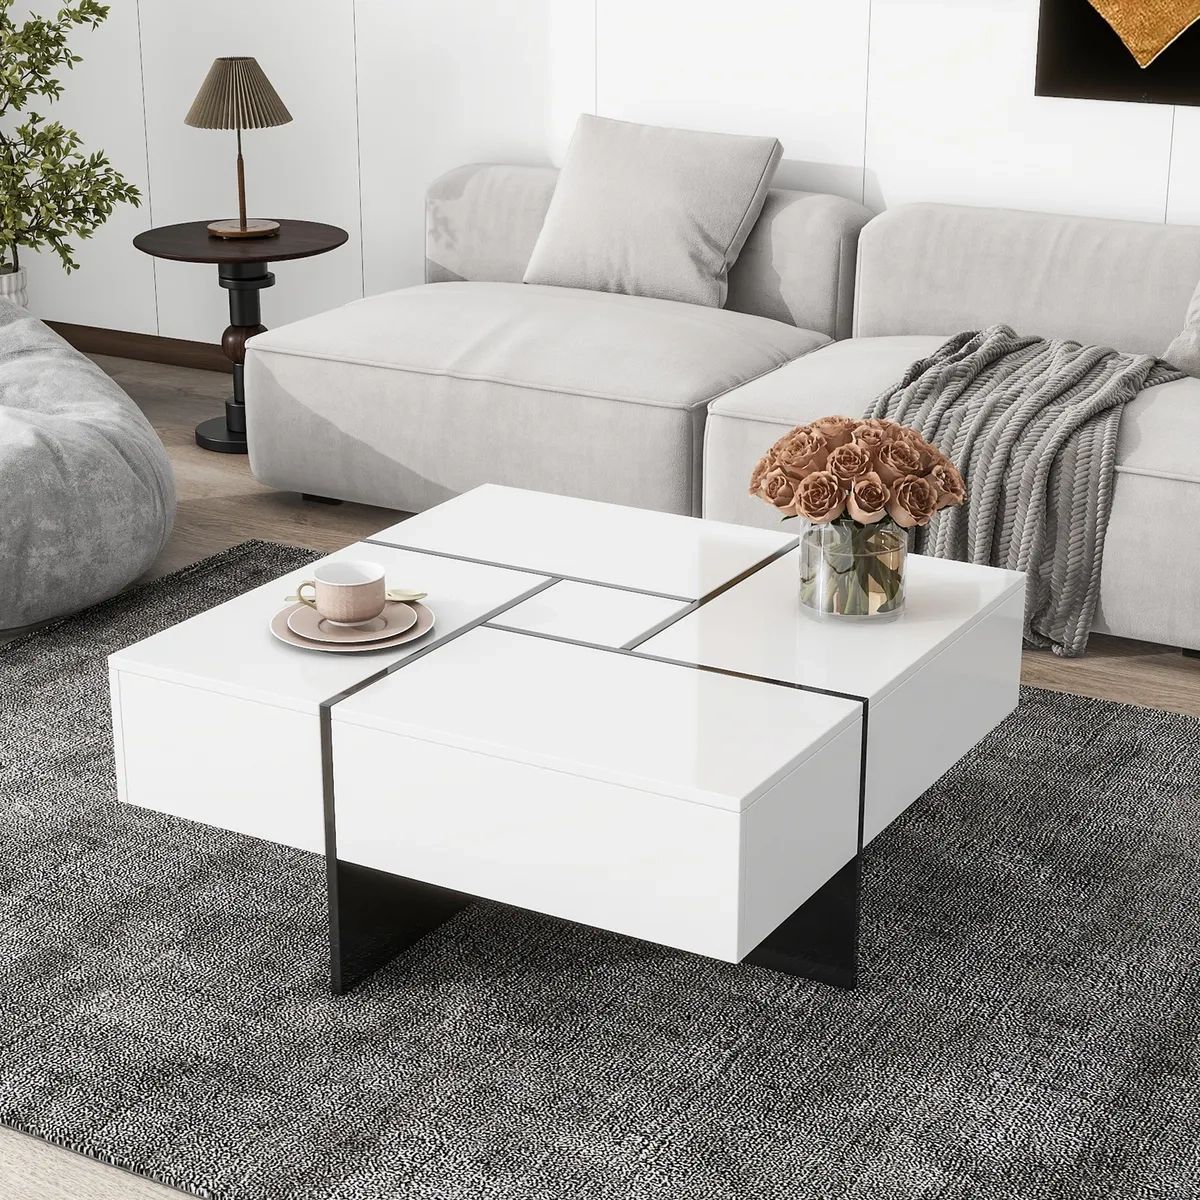 Merax Modern Square Coffee Table Extendable Sliding W/Hidden Storage End  Table | Ebay Inside Modern Coffee Tables With Hidden Storage Compartments (View 3 of 15)